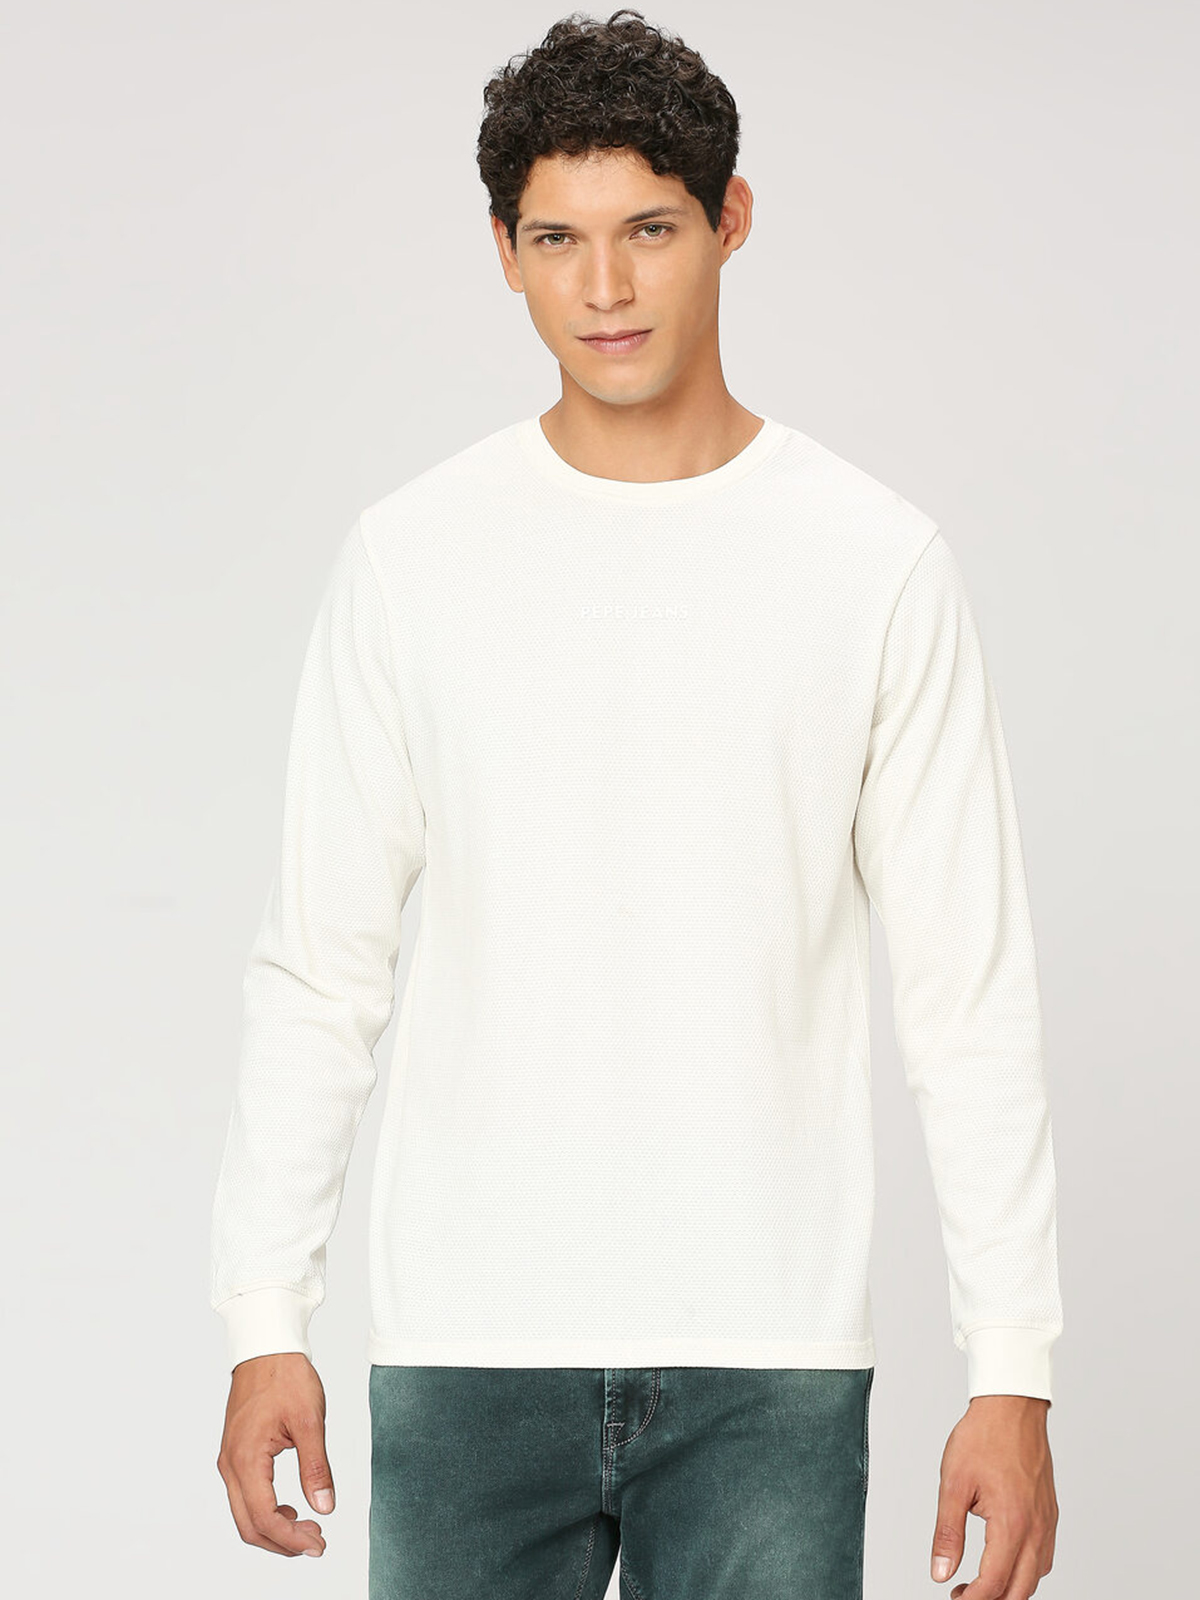 Pepe Jeans G3-MTS16615 t shirt knitted - white plain